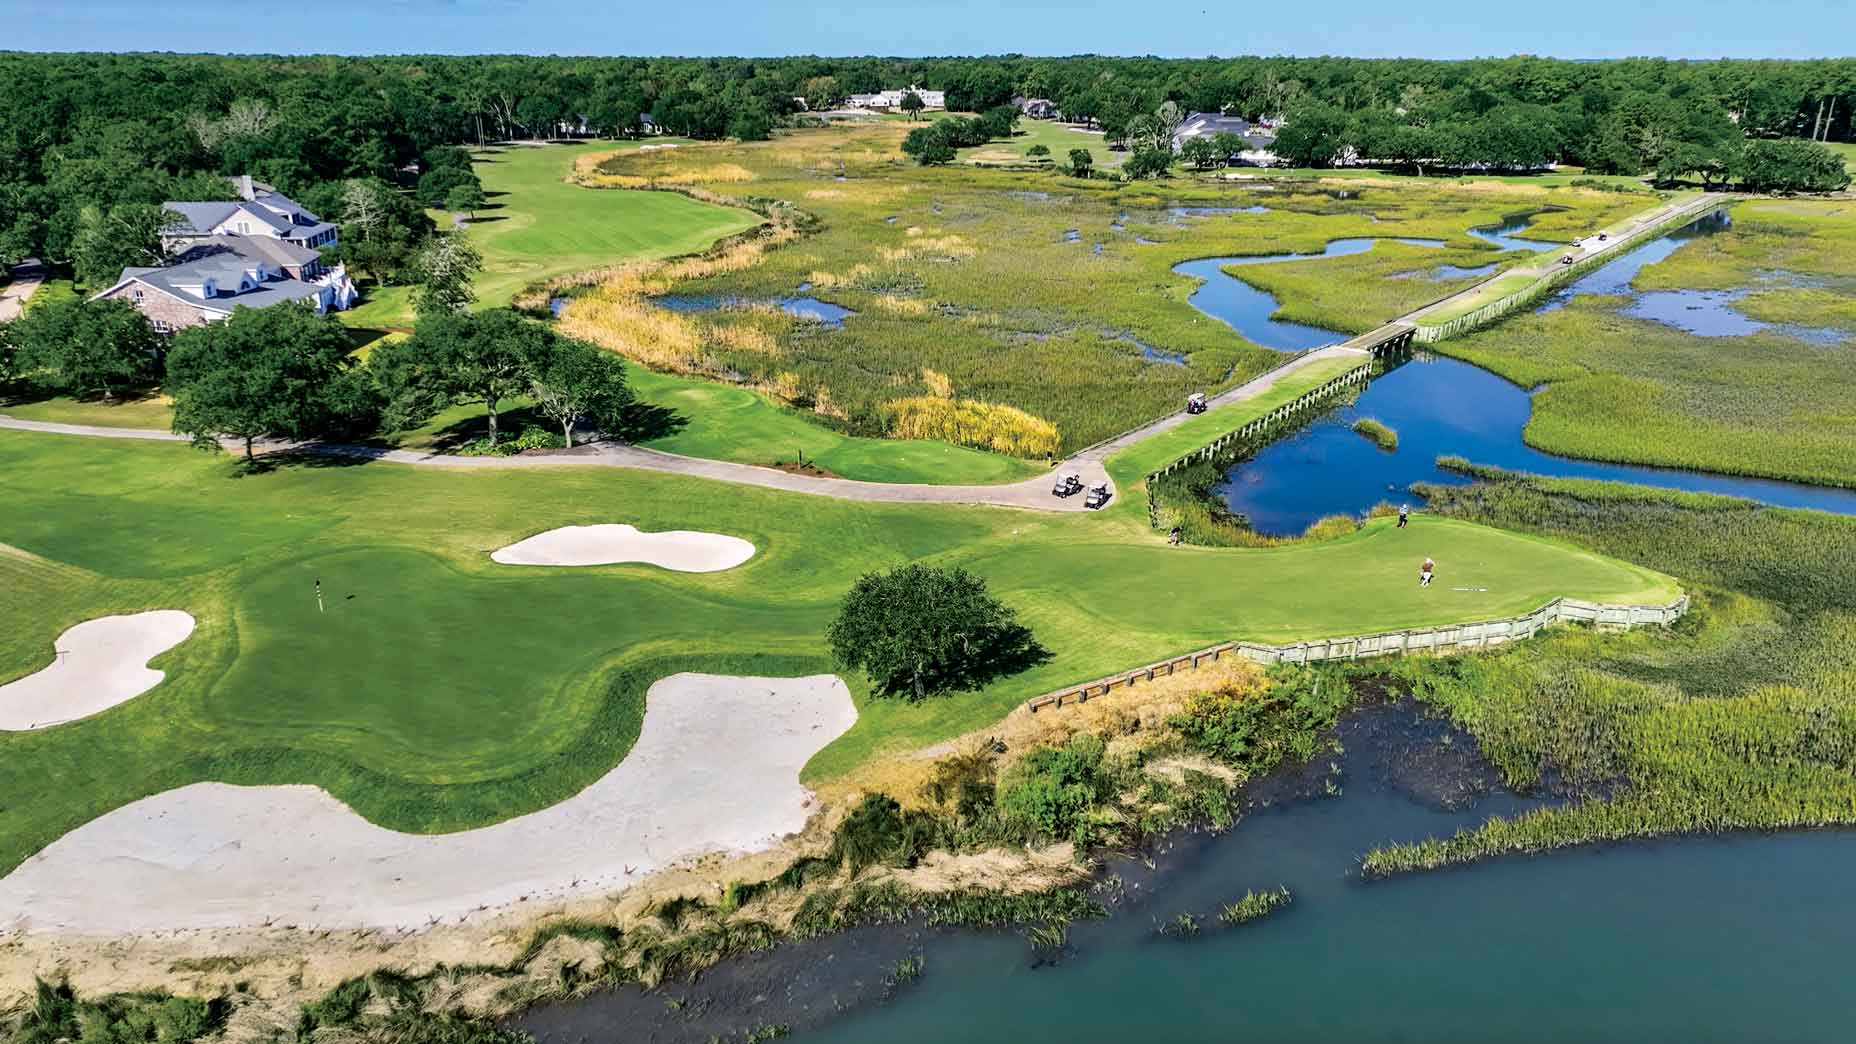 An aerial view of holes 14 and 16 at Pawleys Plantation Golf & Country Club.